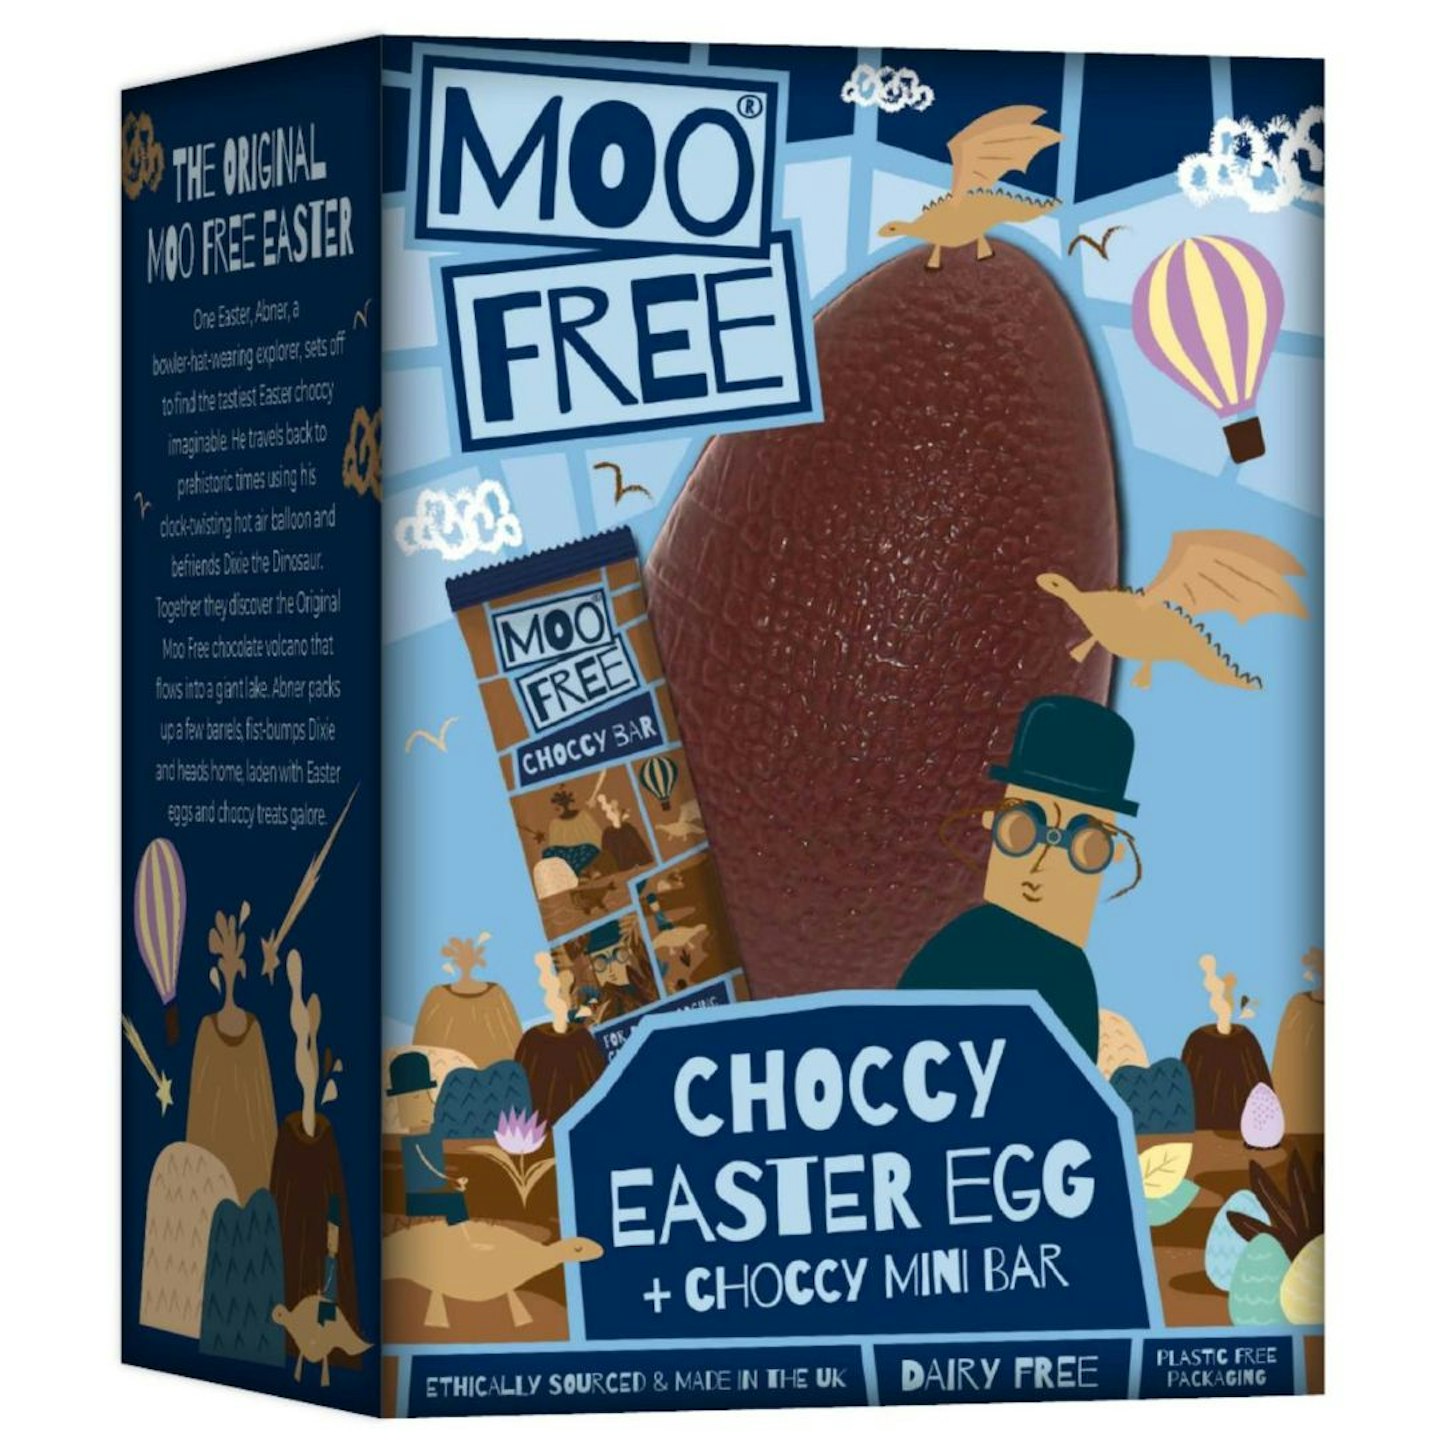 The best Easter eggs for kids: Moo Free Original Choccy Easter Egg with Choccy Mini Bar